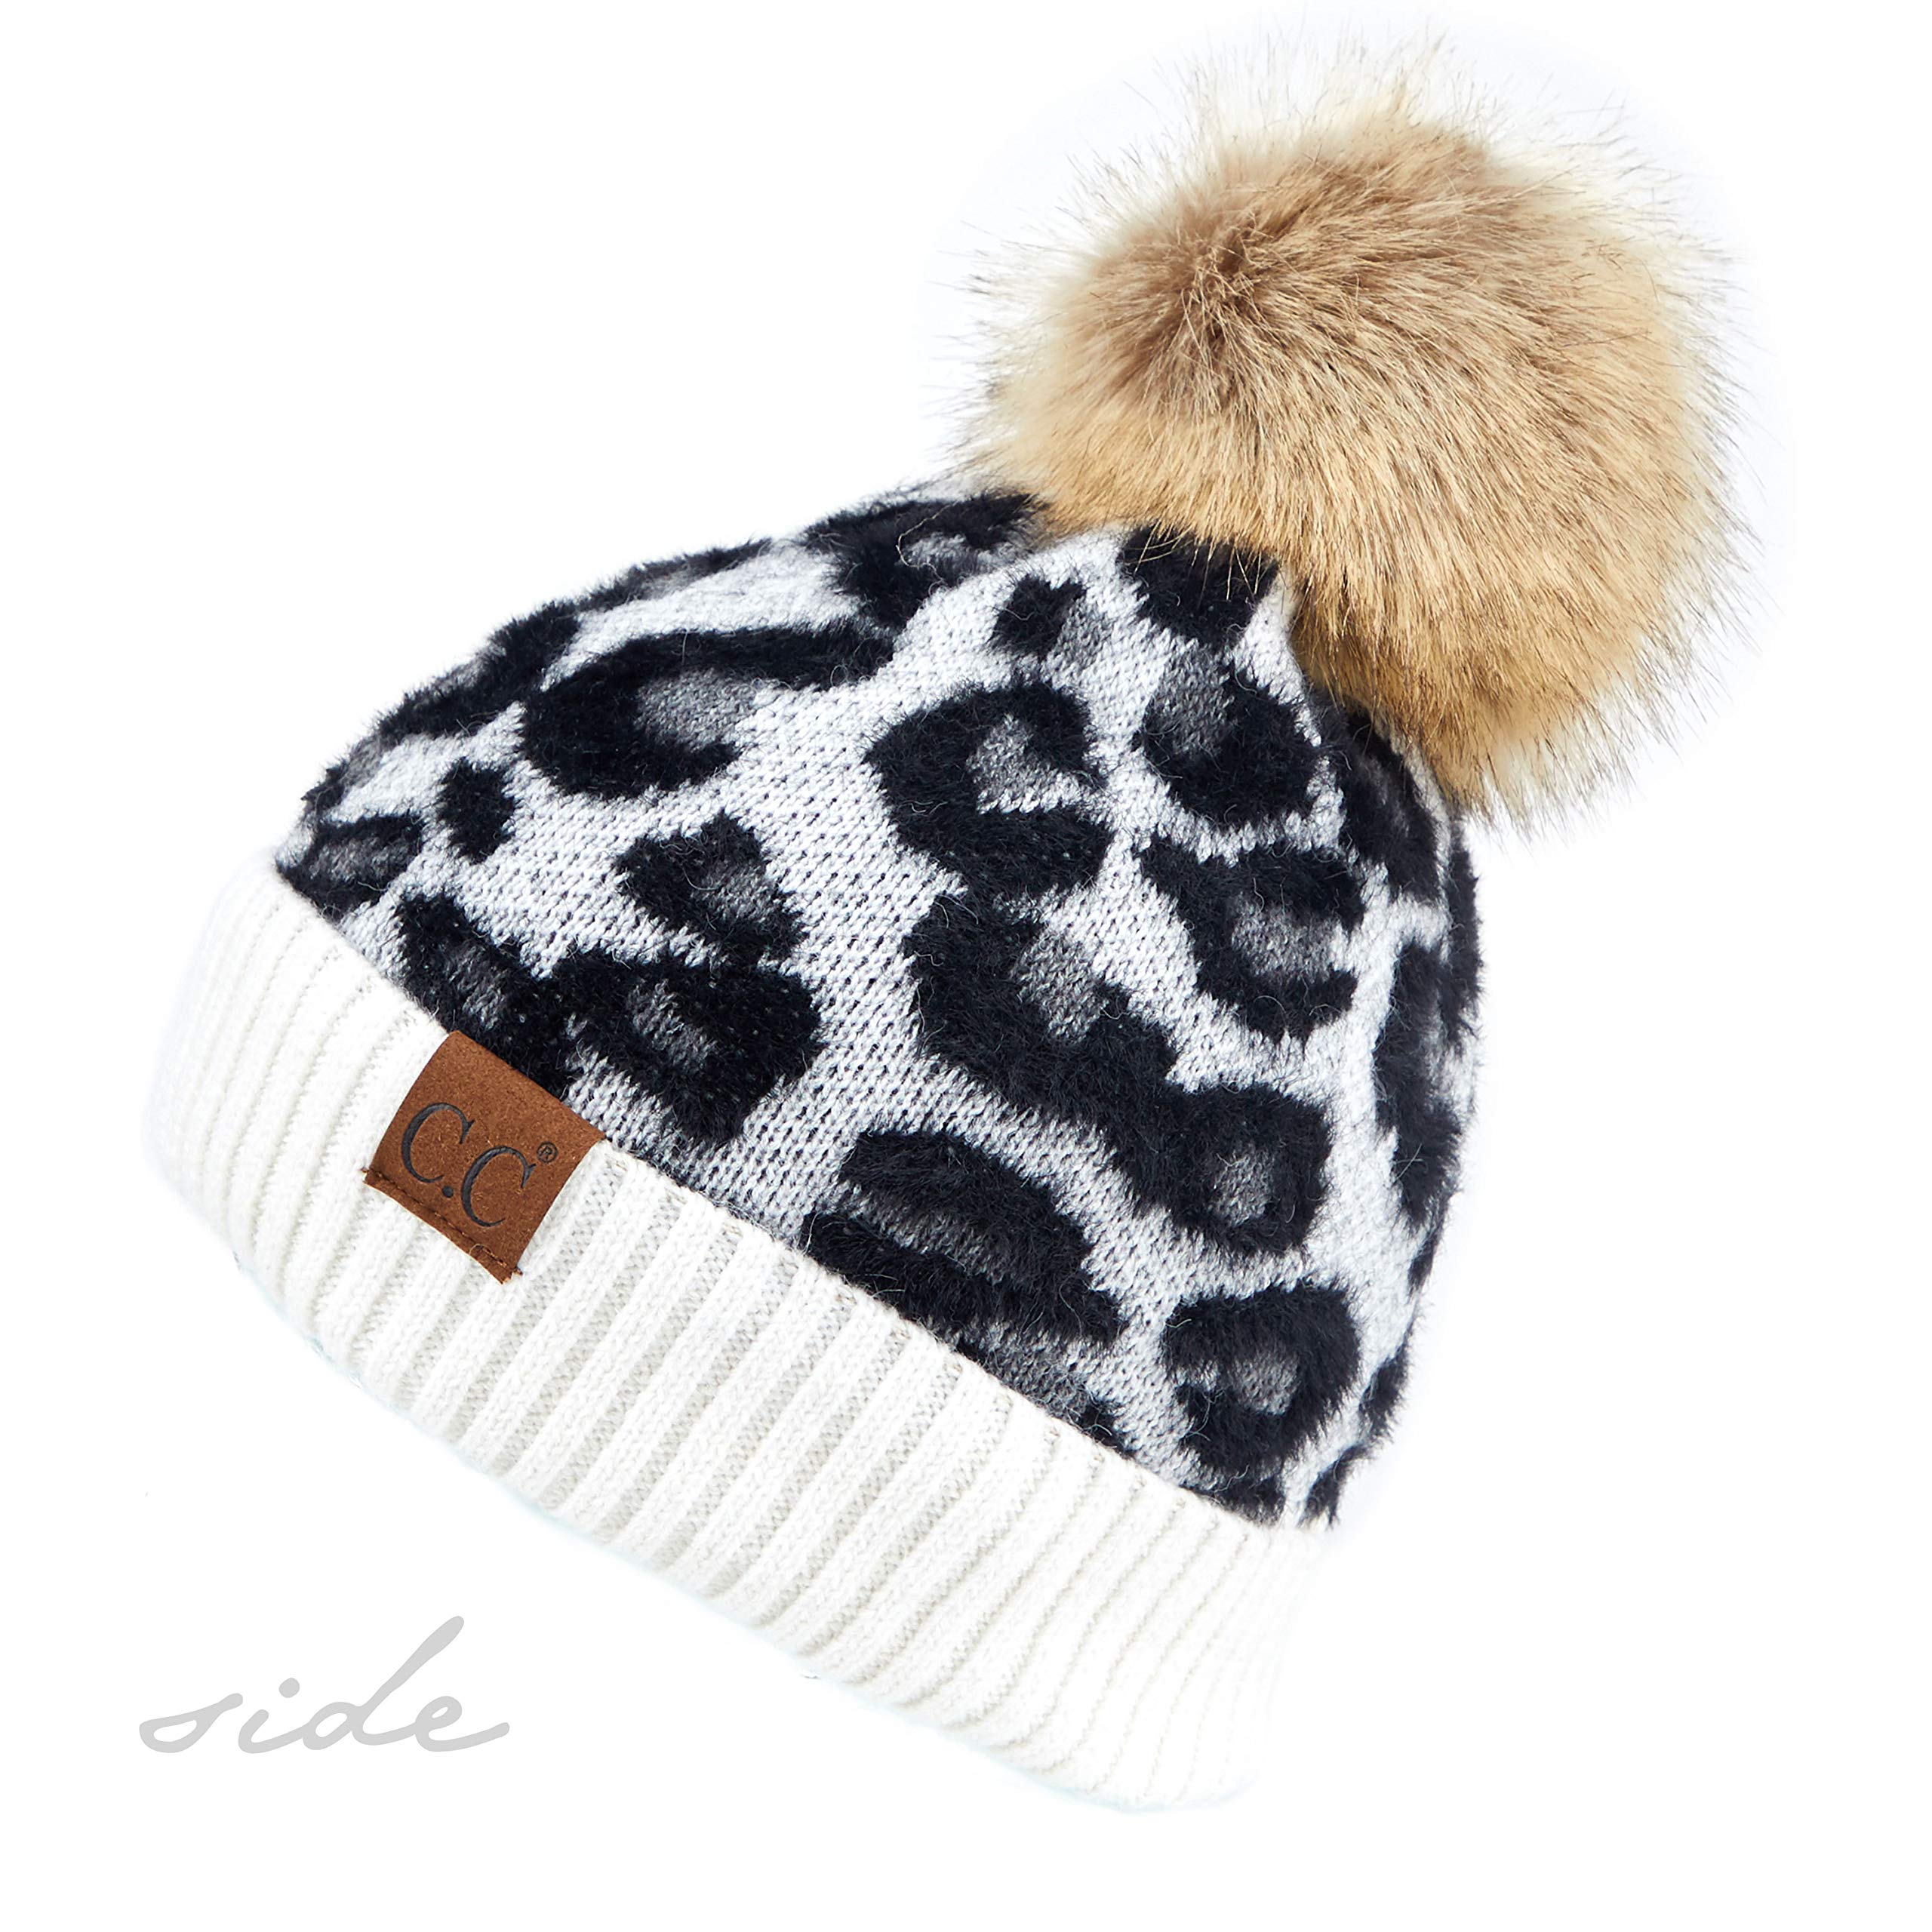 C.C Exclusives Soft Beanie hat with Leopard Pattern and Fur Pom, a Rubber Band Included (HAT-2061) (Ivory)